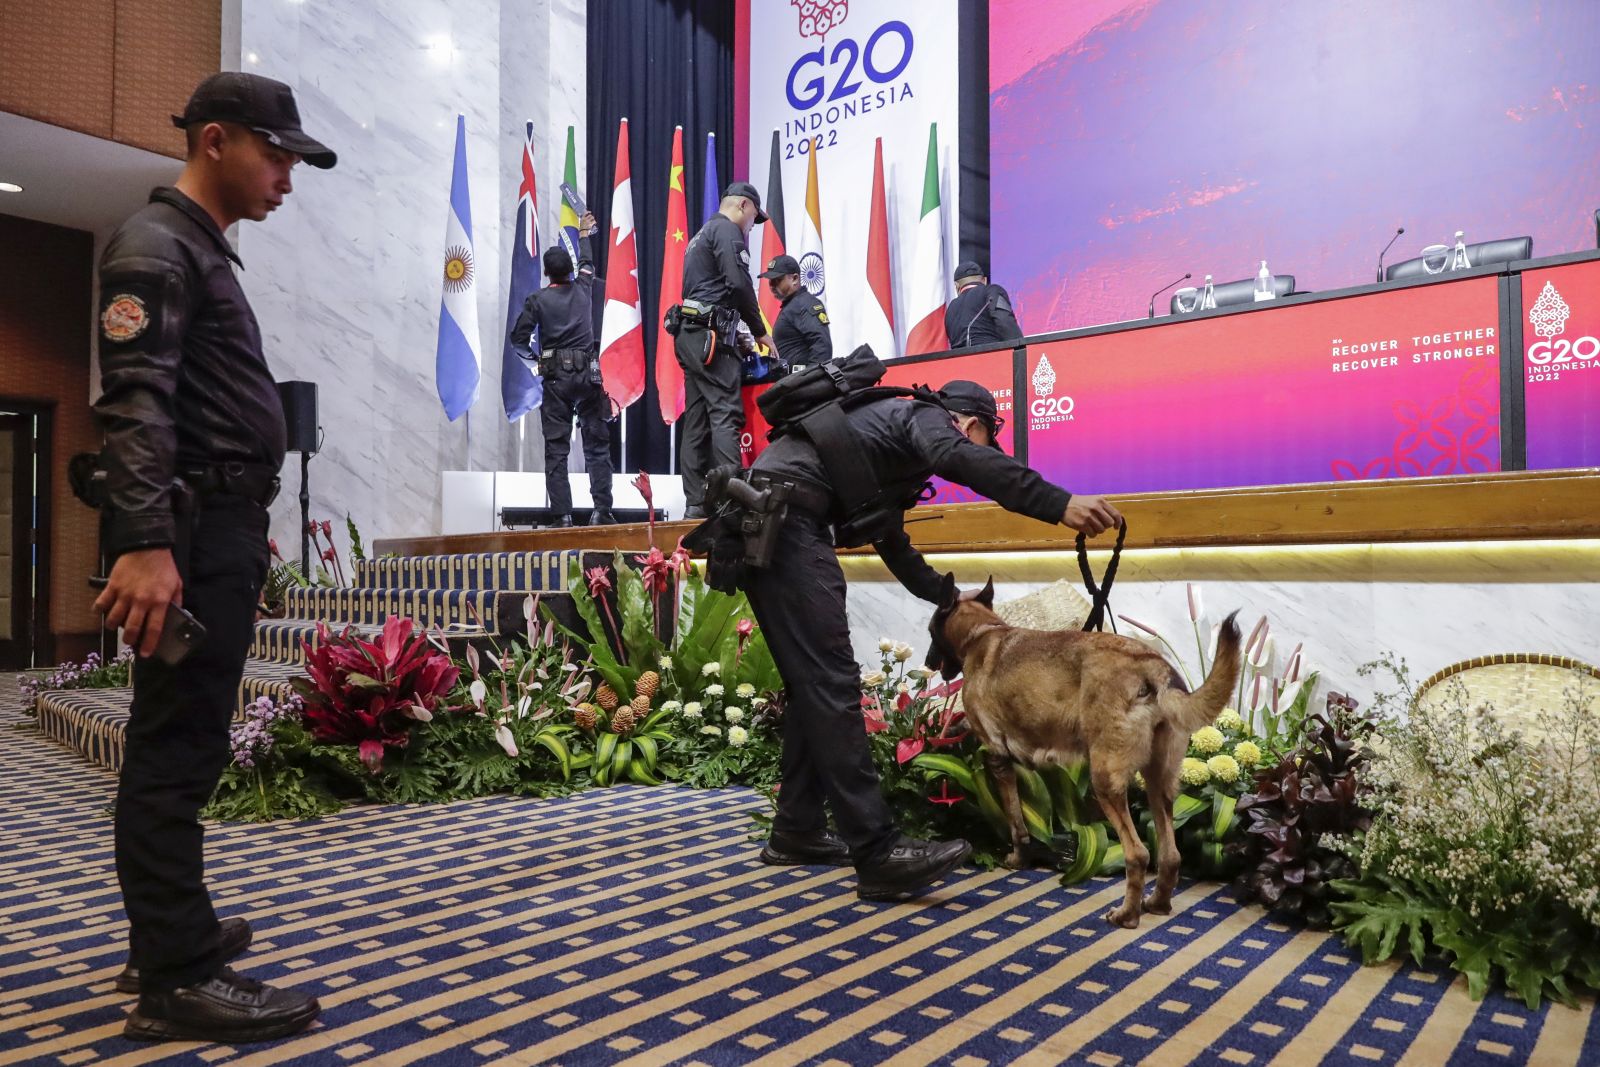 epa10304748 Members of the presidential security force with a sniffer dog inspect the podium at one of the venues of the G20 Summit in Nusa Dua, Bali, Indonesia, 14 November 2022. Bali will host the 17th Group of 20 (G20) Heads of State and Government Summit from 15 to 16 November 2022.  EPA/MAST IRHAM